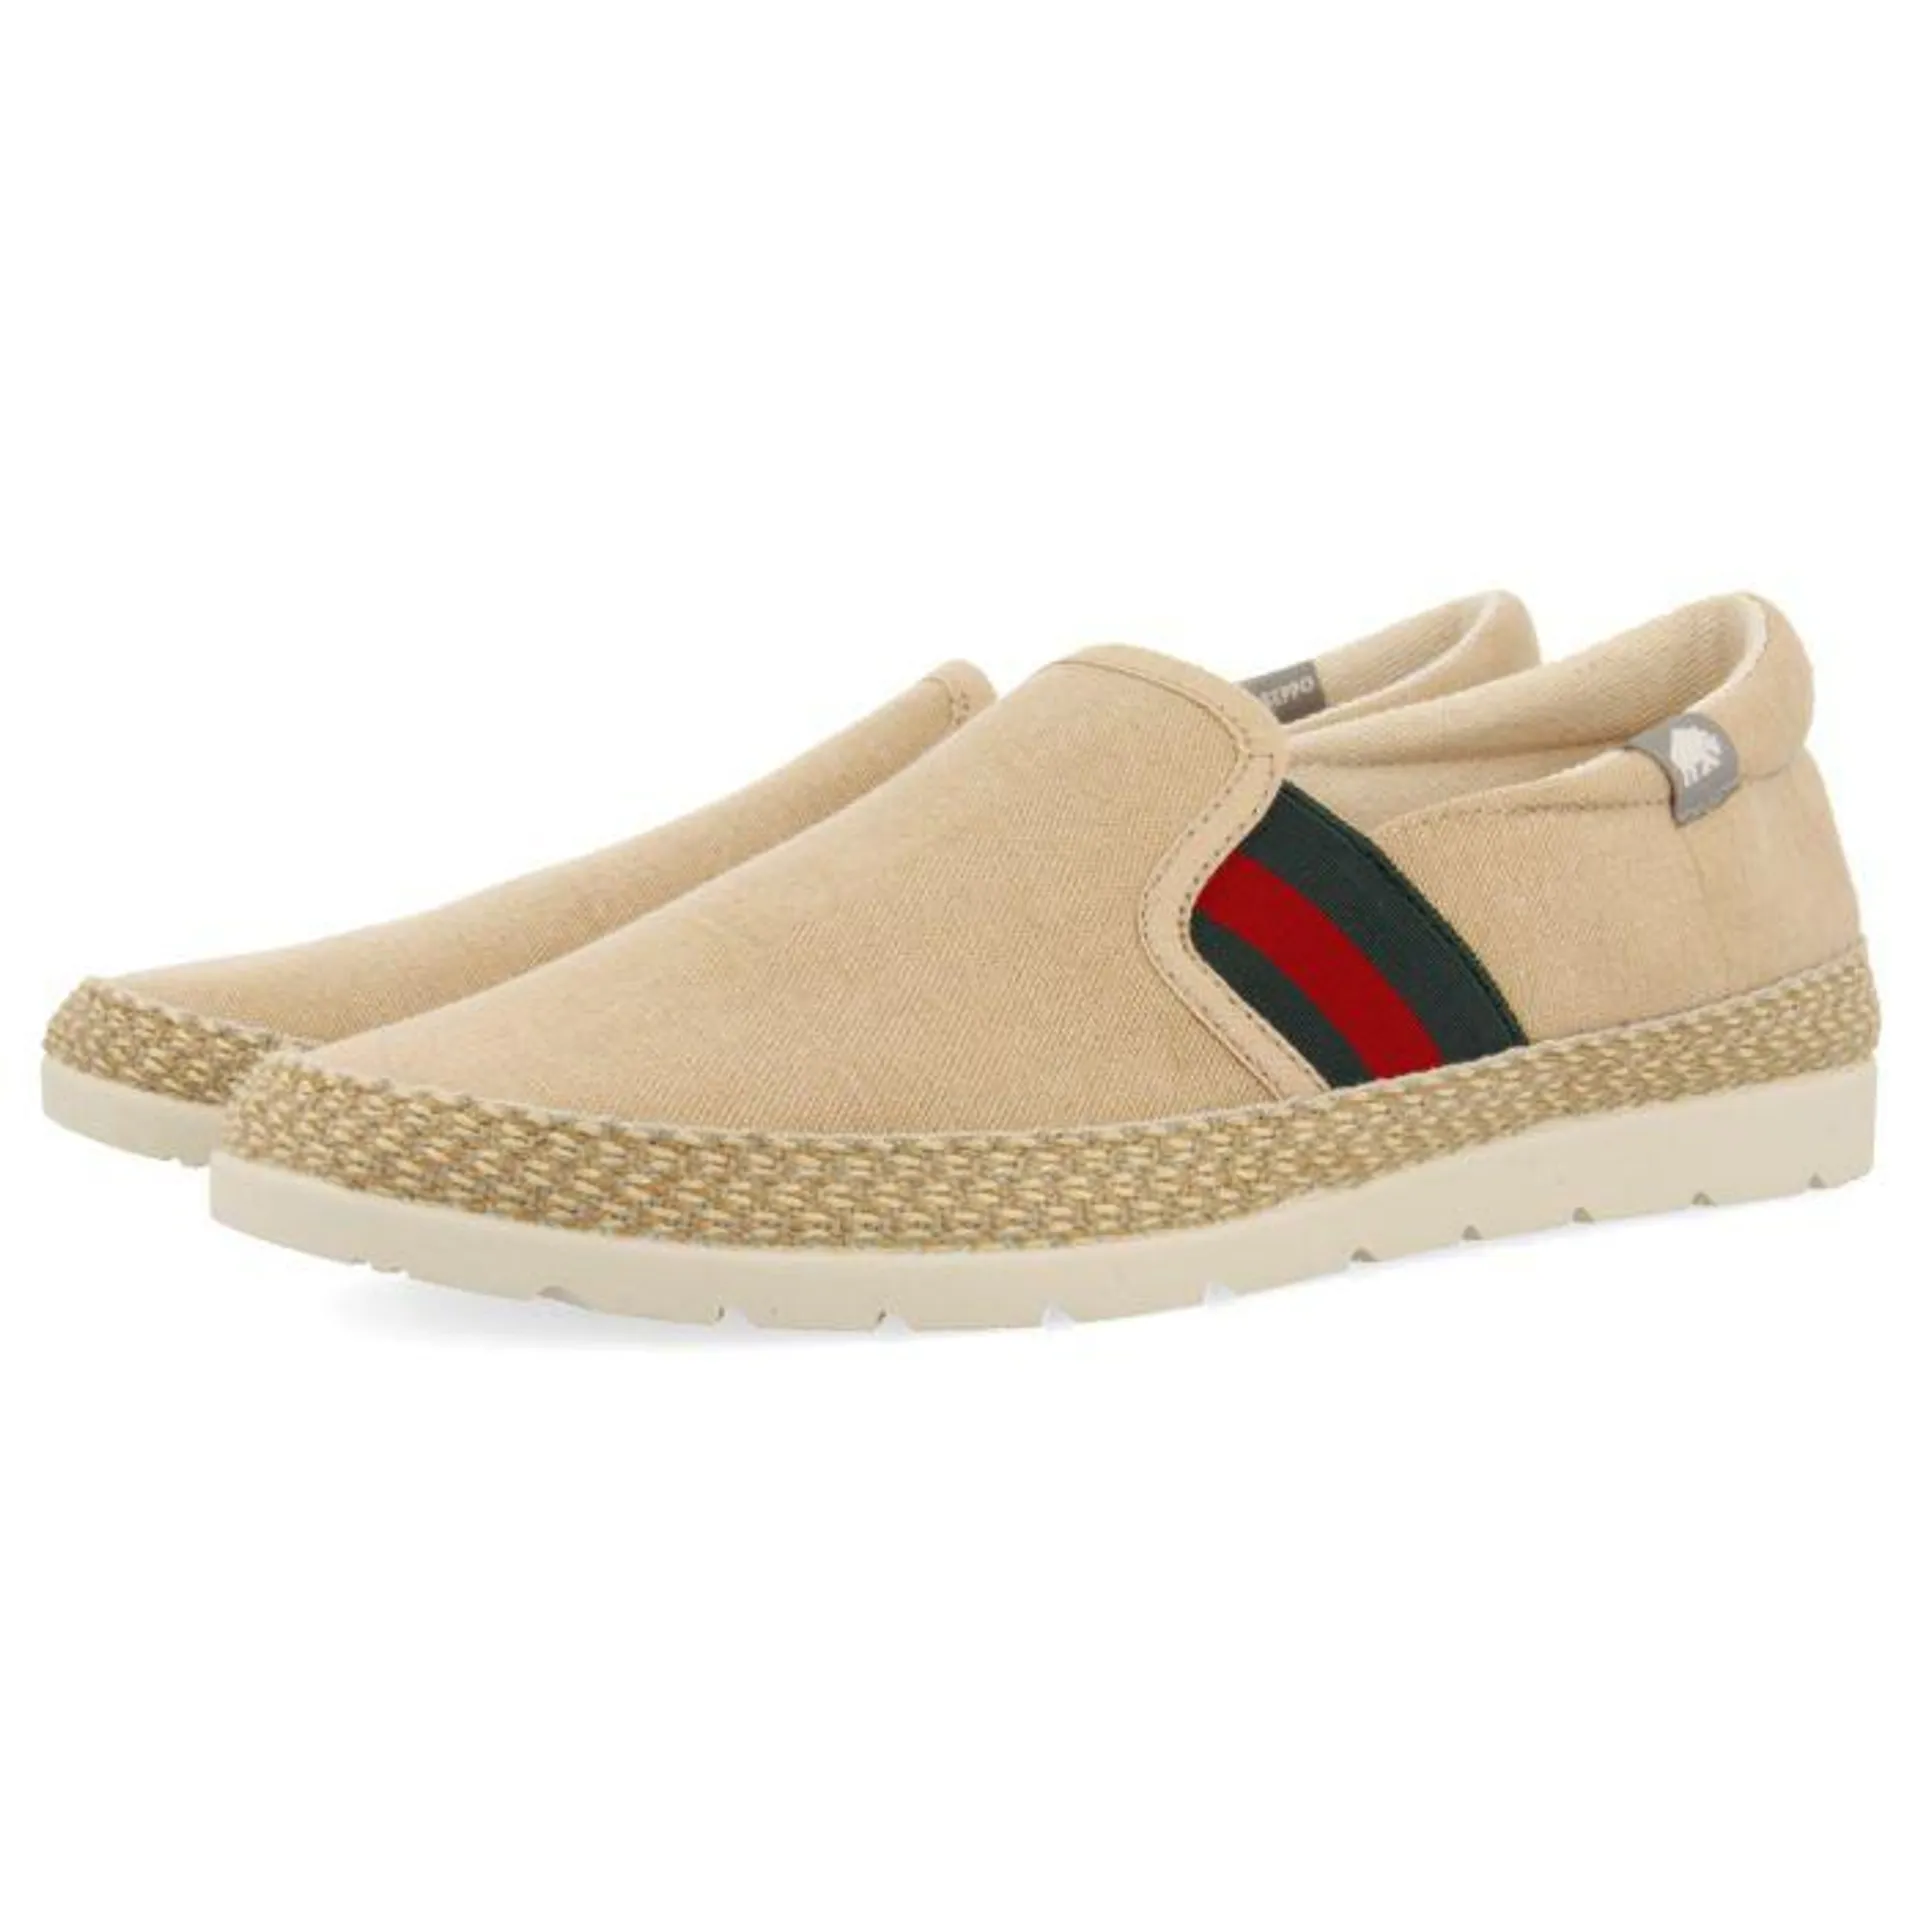 BEIGE ESPADRILLES WITH COLORED ELASTICS AND RECYCLED COTTON FOR MEN WIMER